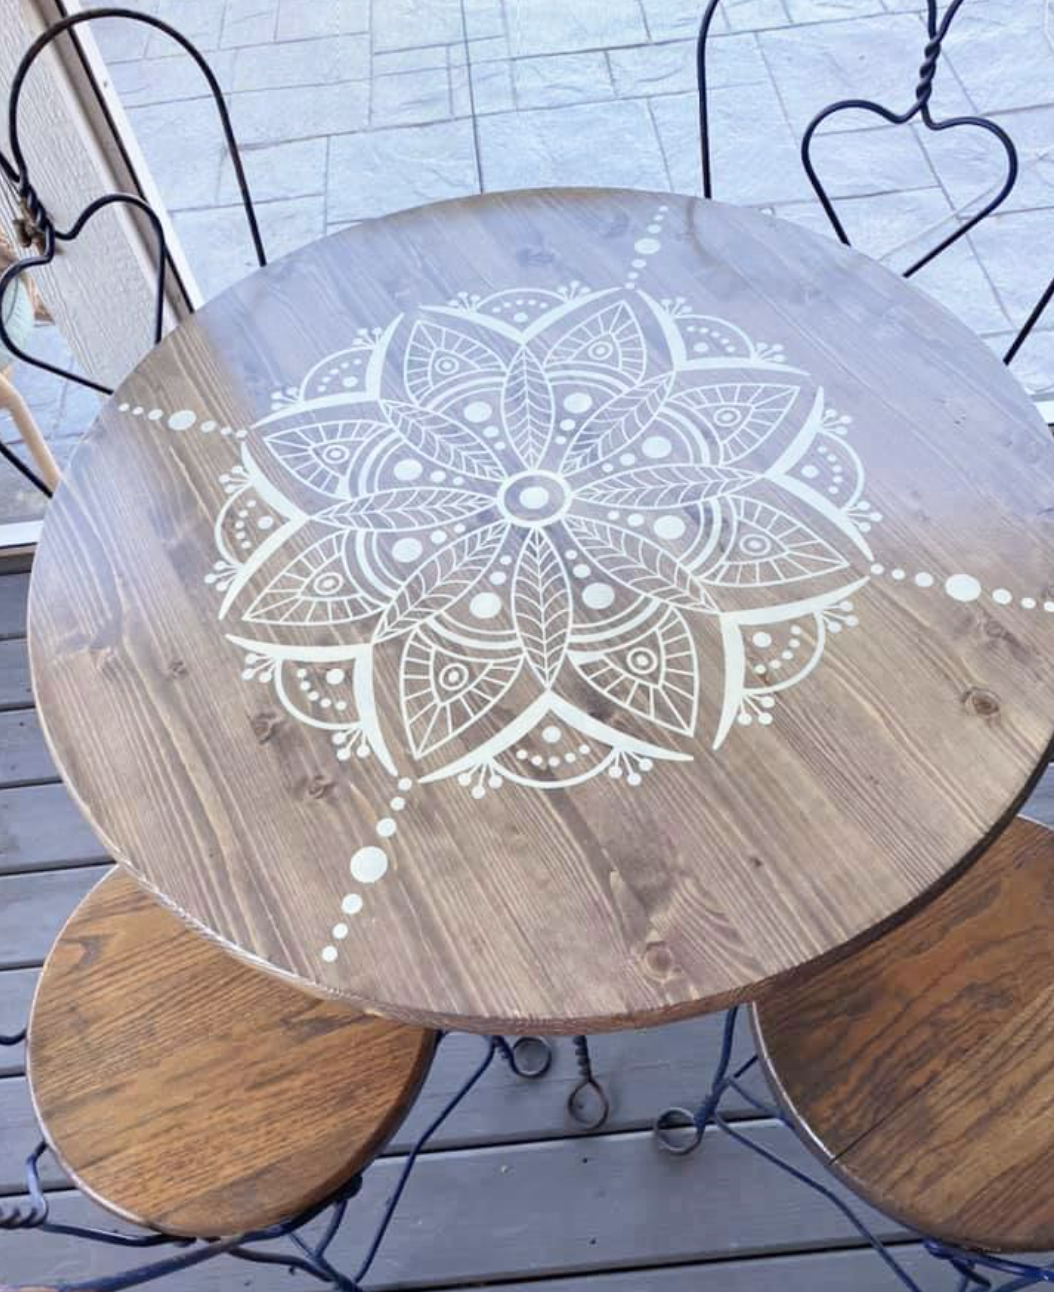 Porch bistro table with vinyl decal